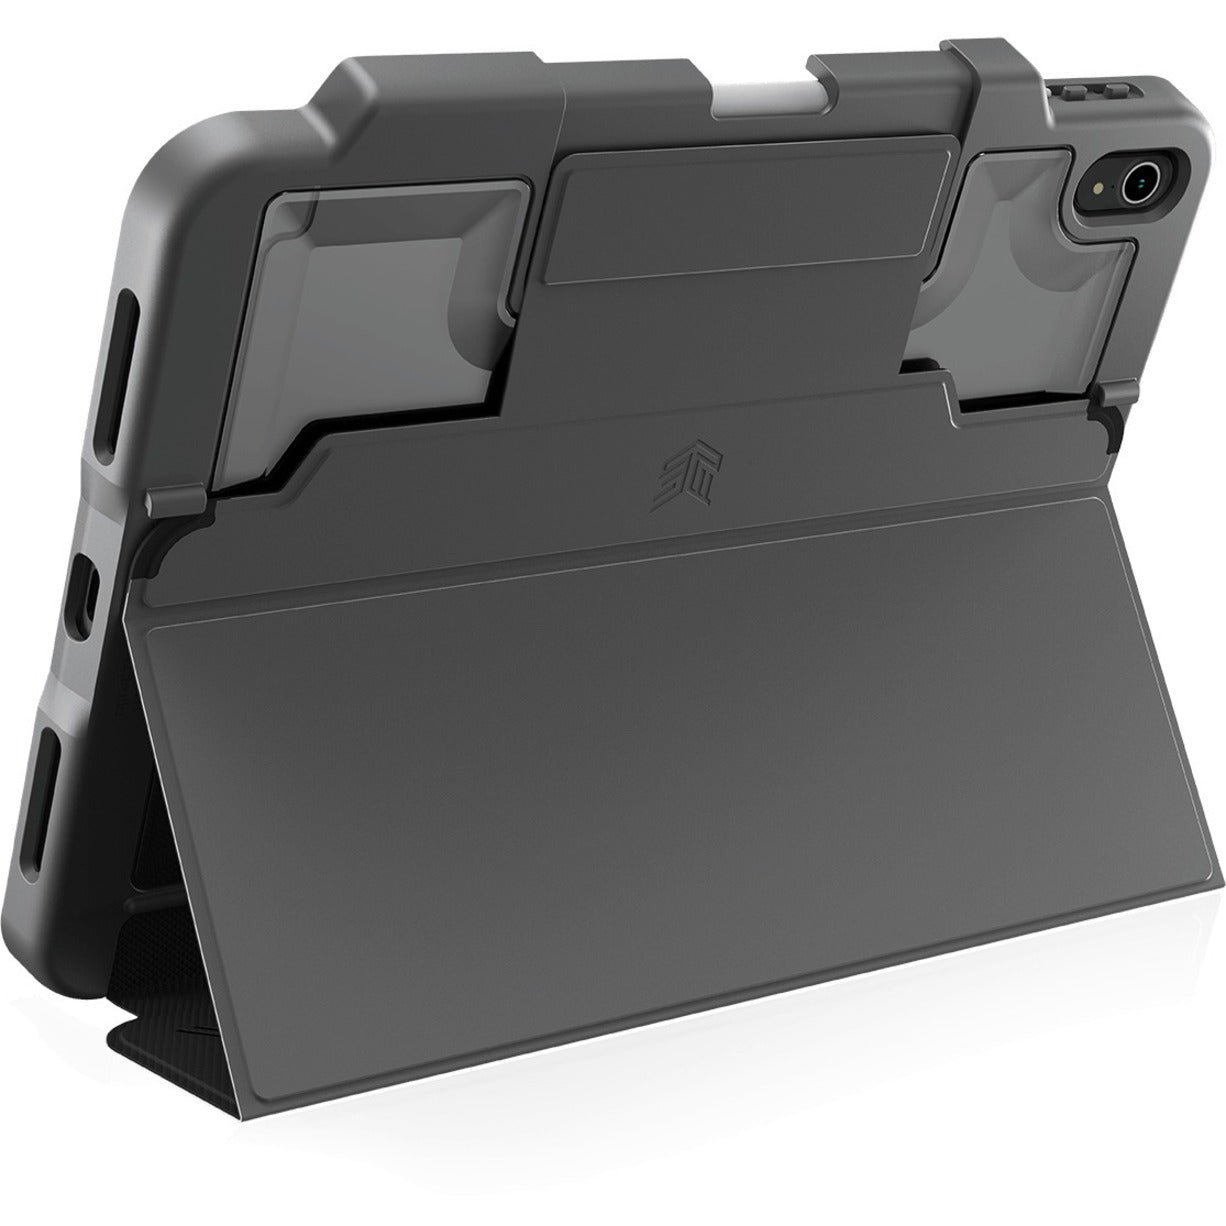 STM Goods STM-222-387KX-01 Dux Plus for iPad (10th Generation), Magnetic Closure, Rugged, Drop and Bump Resistant, Black